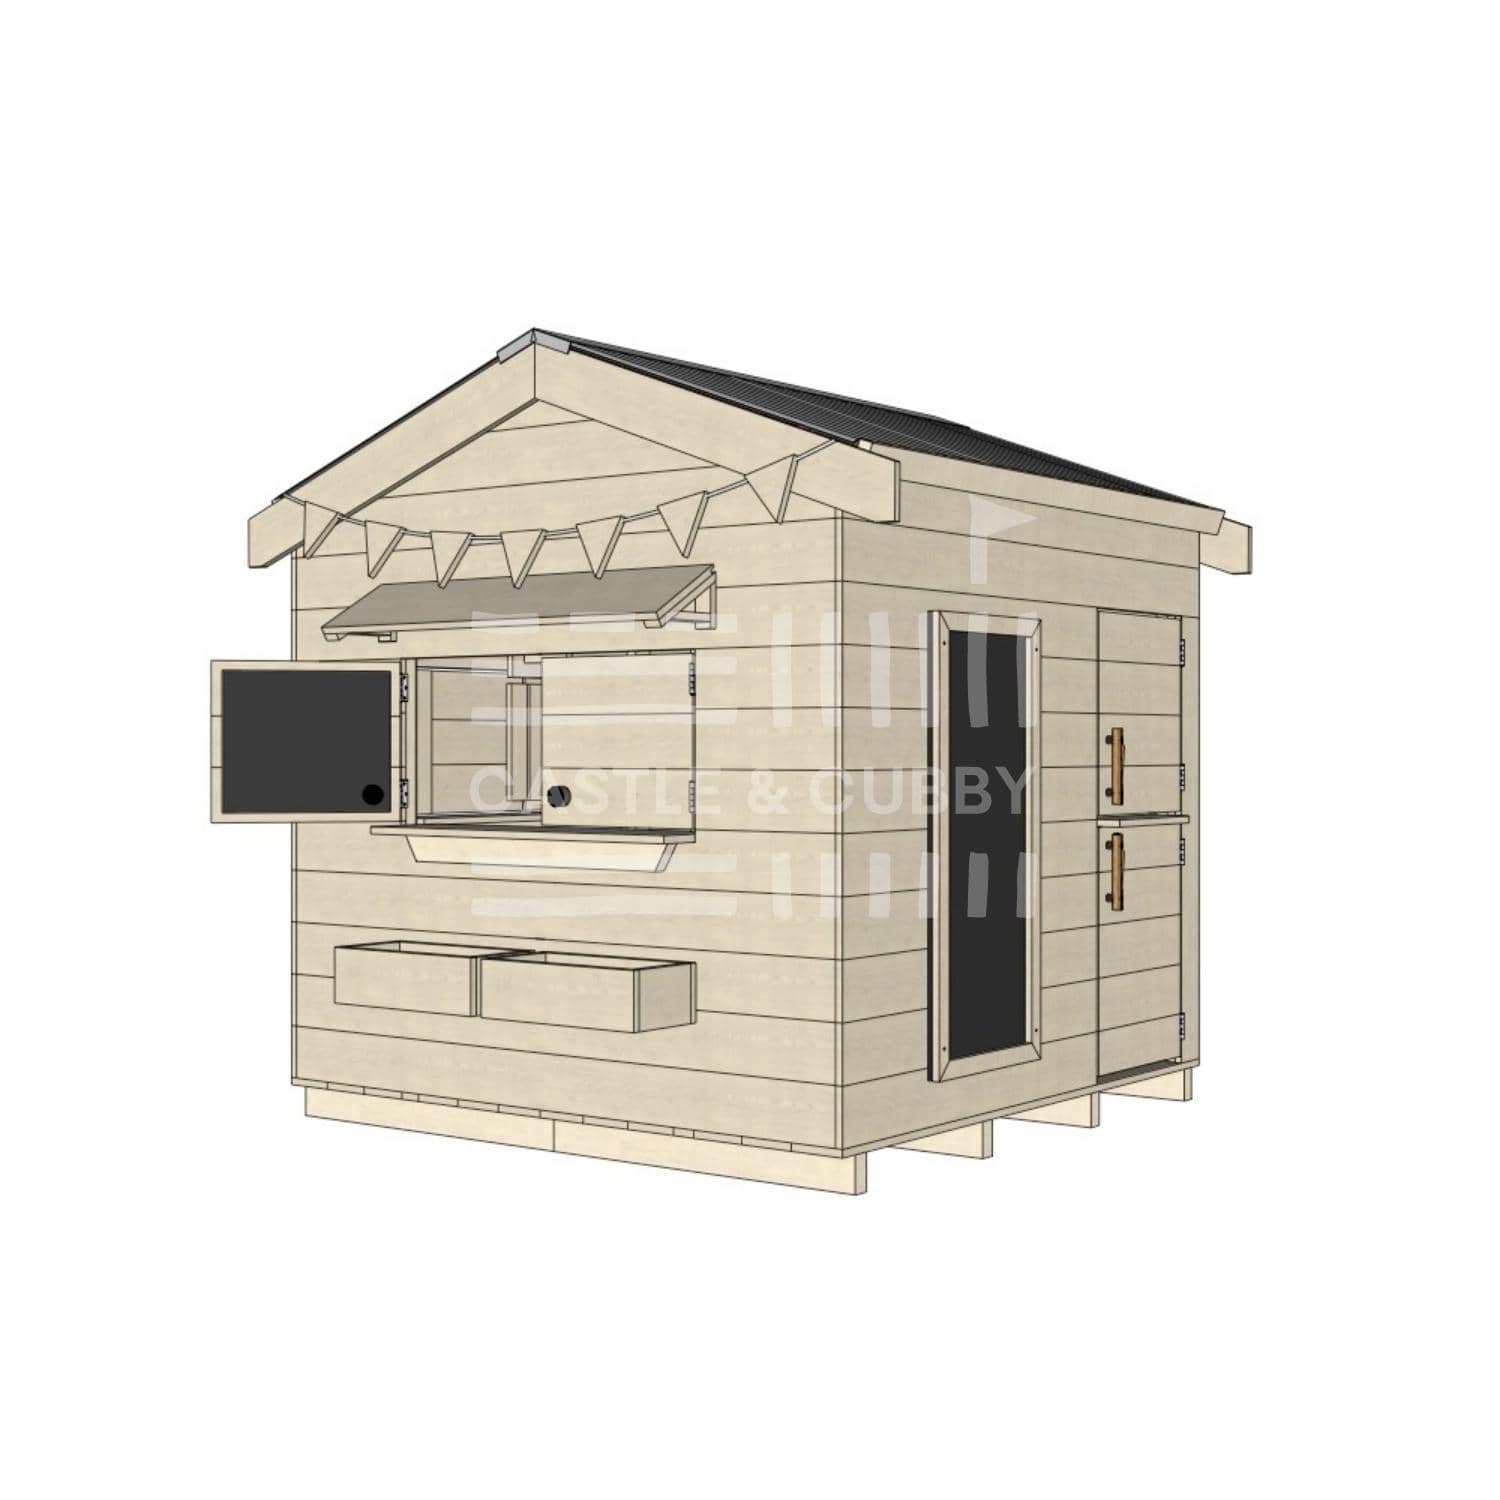 Pitched roof raw wooden cubby house residential and family homes midi square accessories